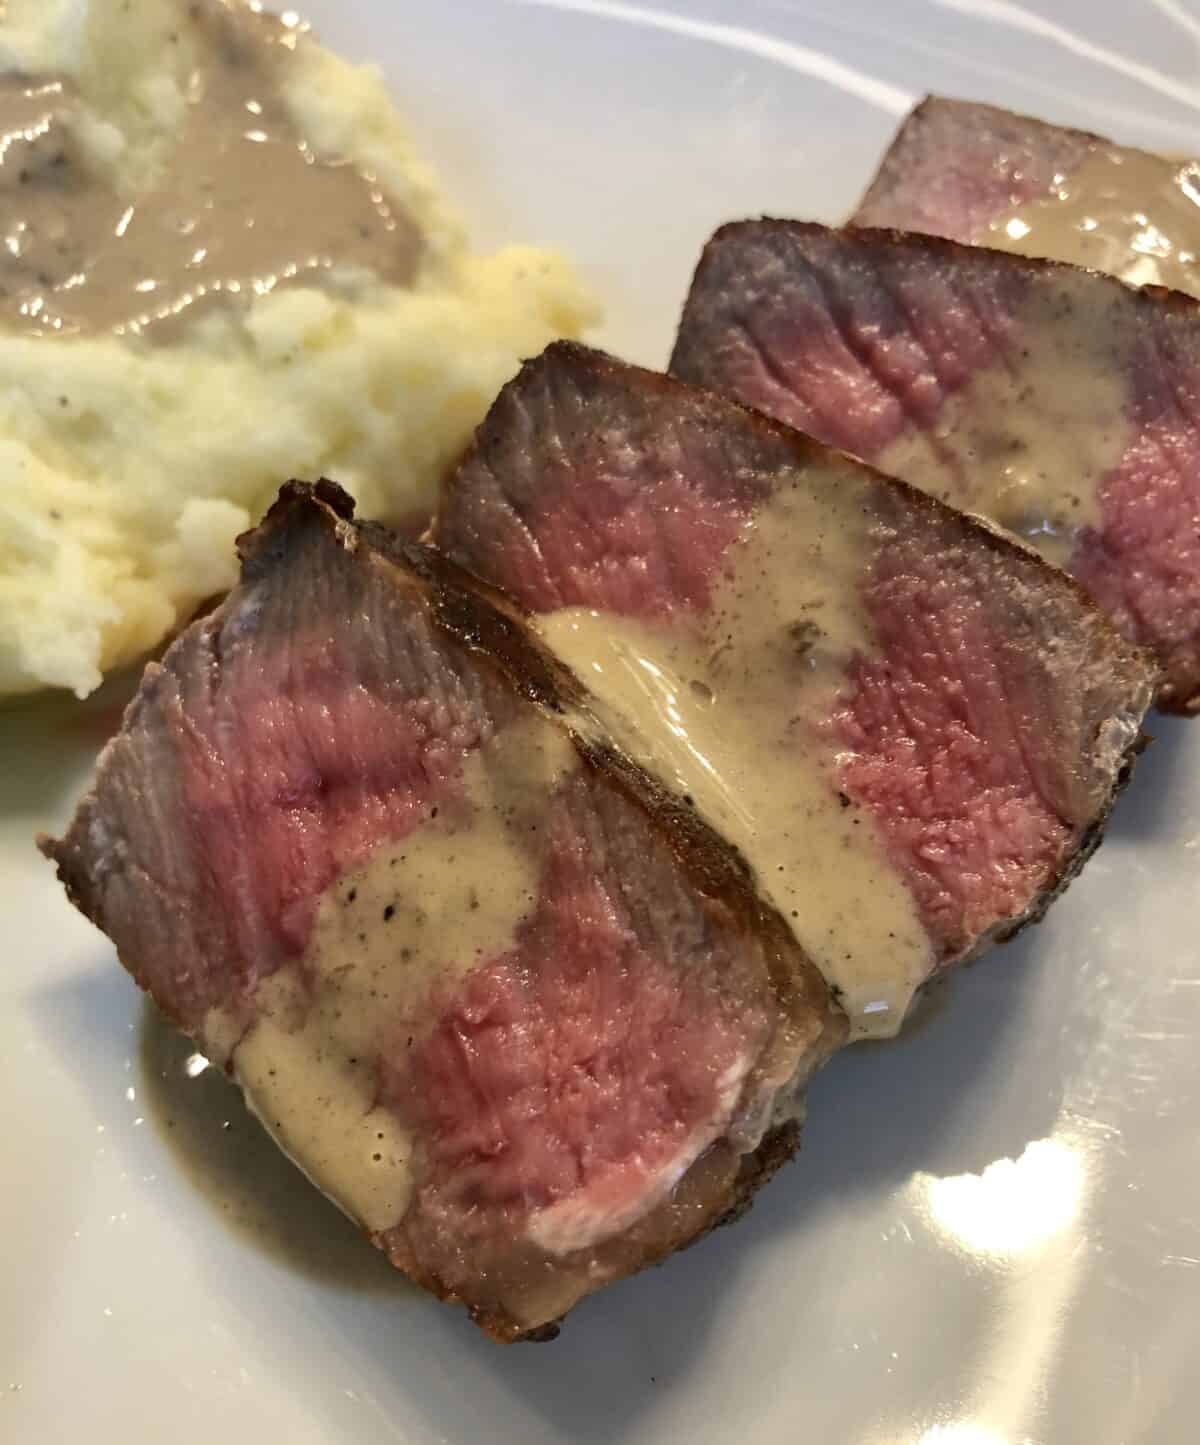 White plate of sliced steak with mashed potatoes and drizzled with cognac cream sauce